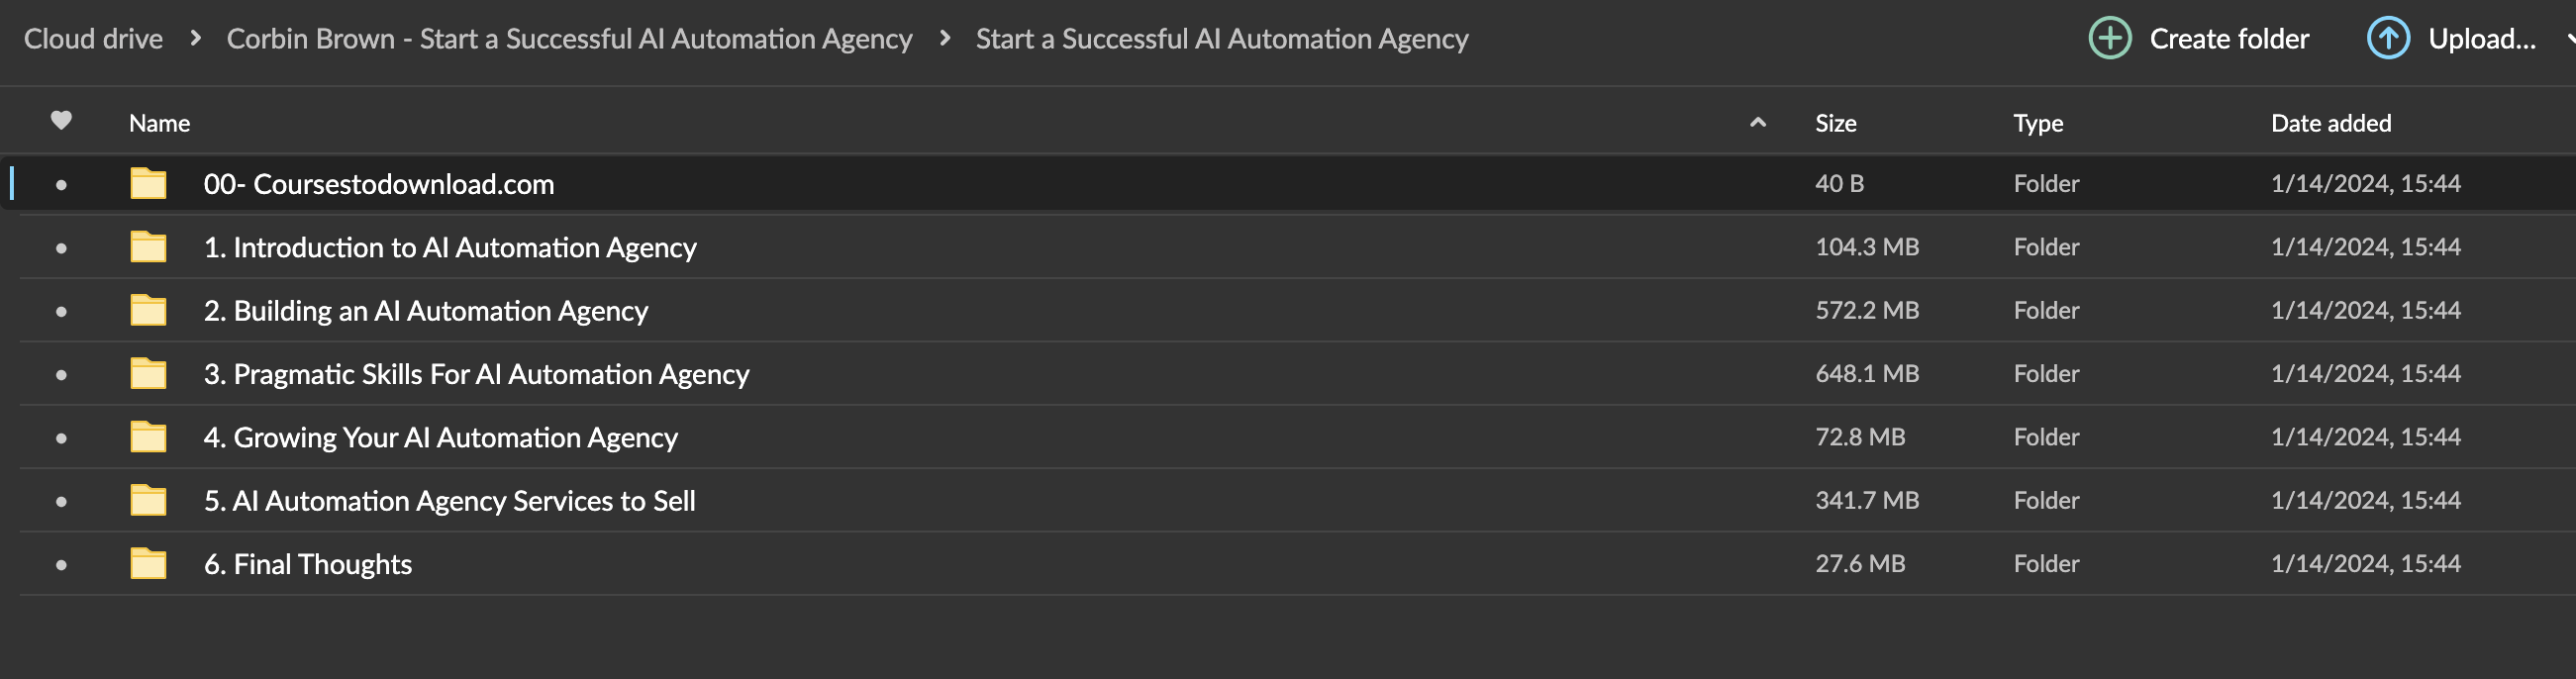 Corbin Brown - Start a Successful AI Automation Agency Download